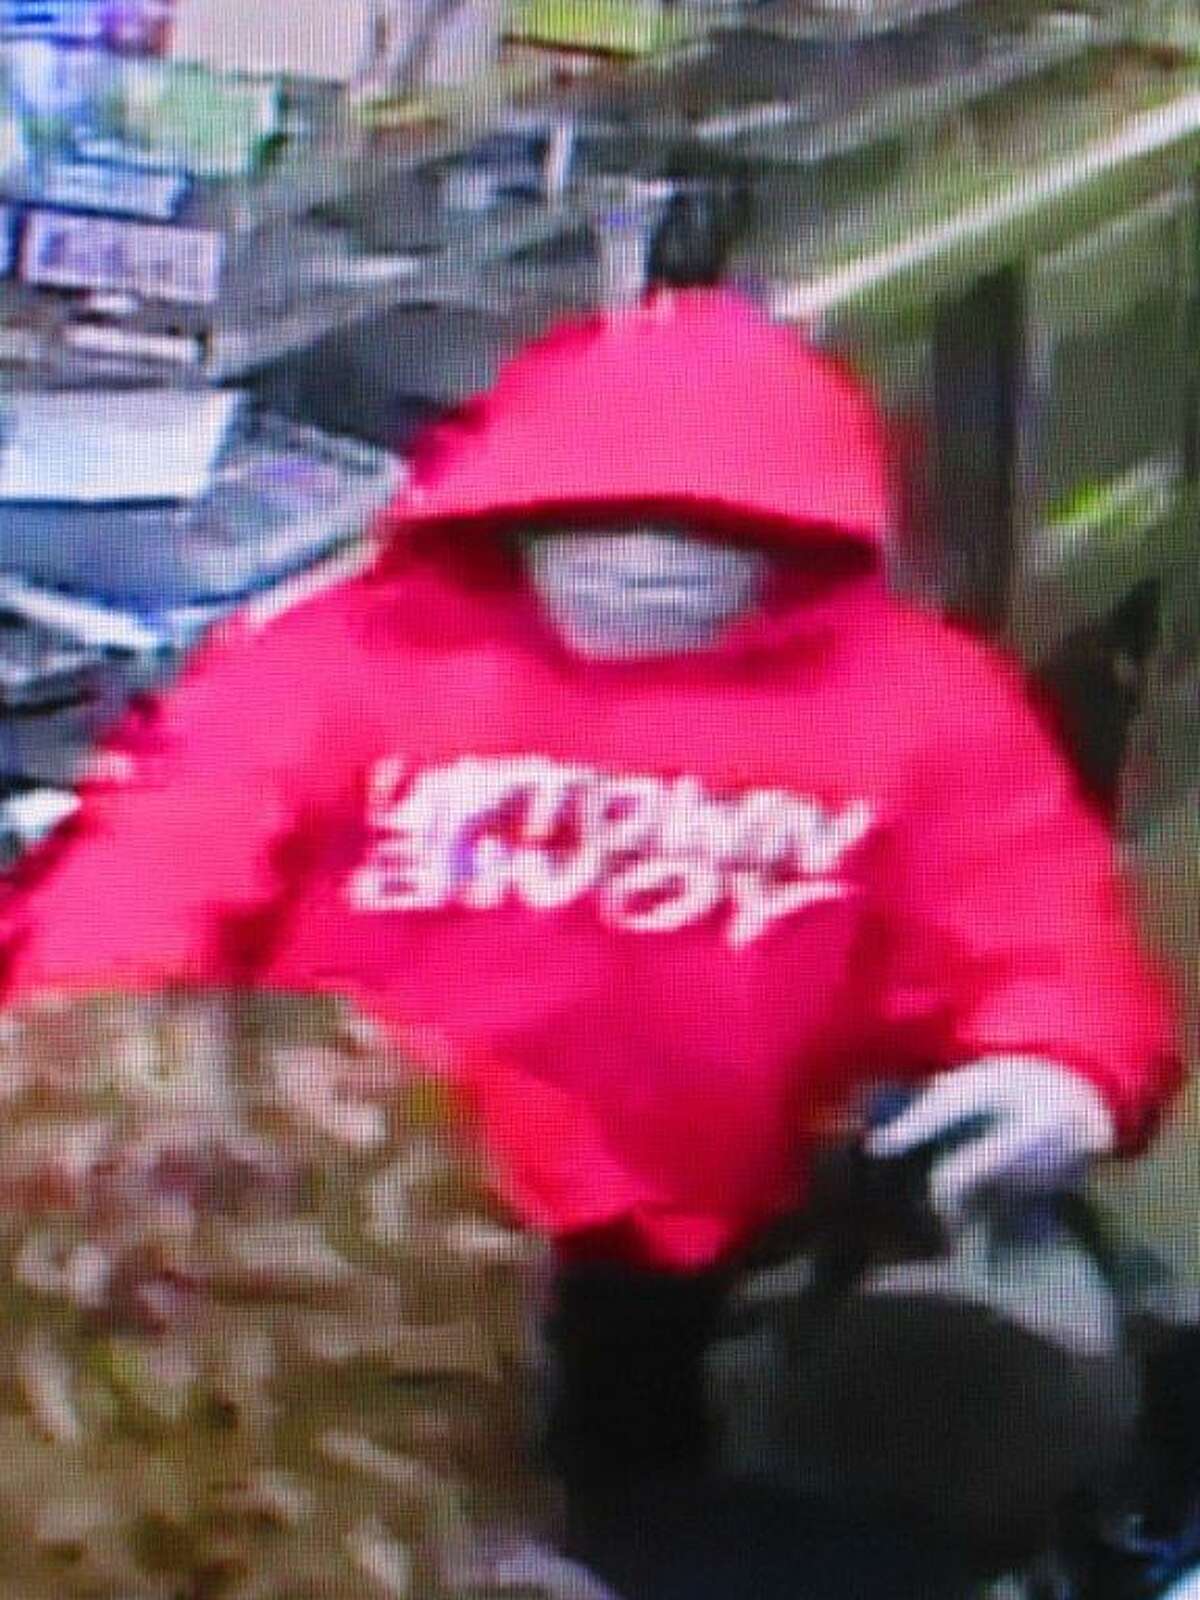 Police are investigating a Wednesday morning robbery at a grocery store on Soundview Avenue.